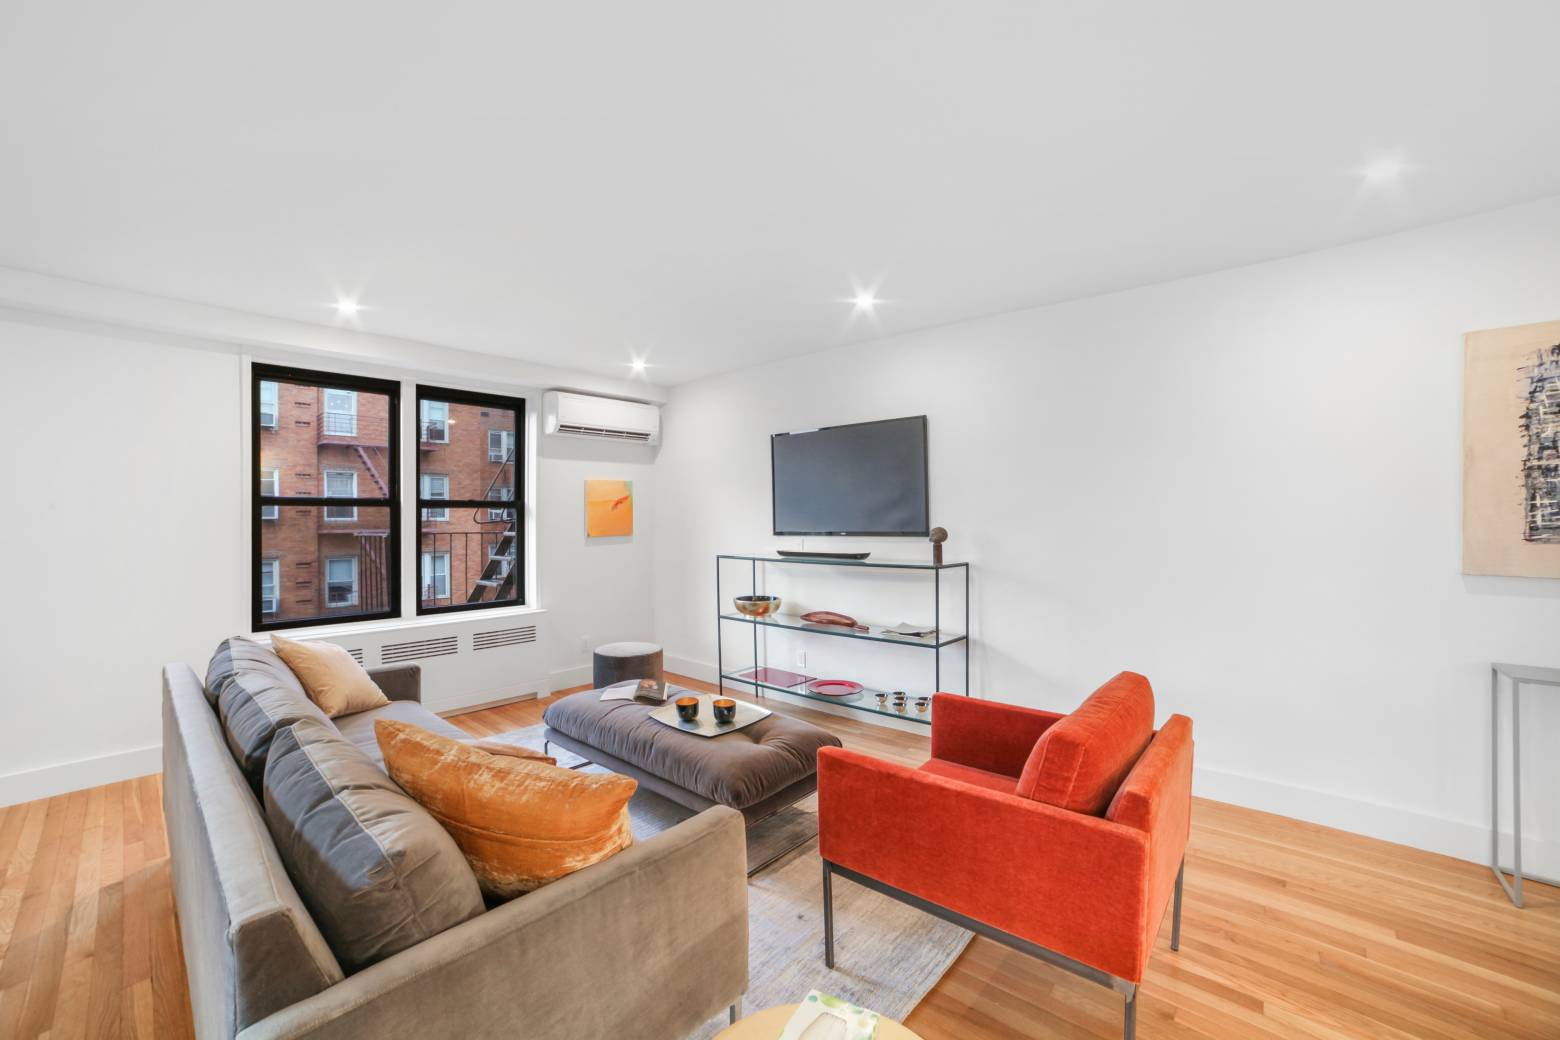 Classic and modern blissfully unite for this fully redesigned and magnificently renovated three bedroom, two bathroom corner apartment.